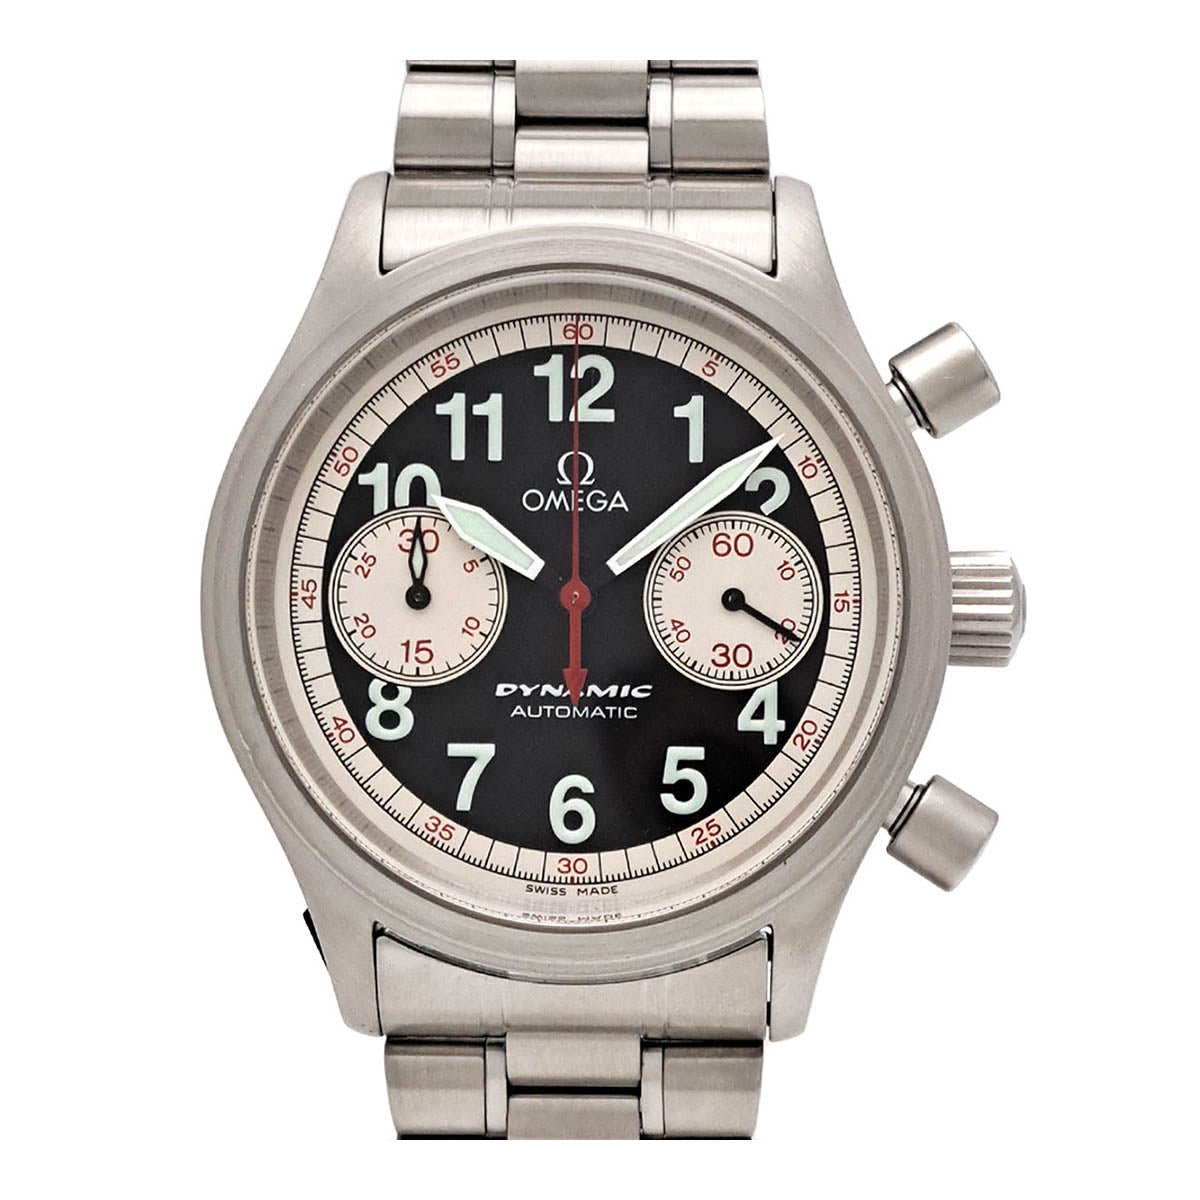 Omega Dynamic Chronograph Targa Florio Limited Edition Men's Stainless Steel Automatic Watch 5241.51